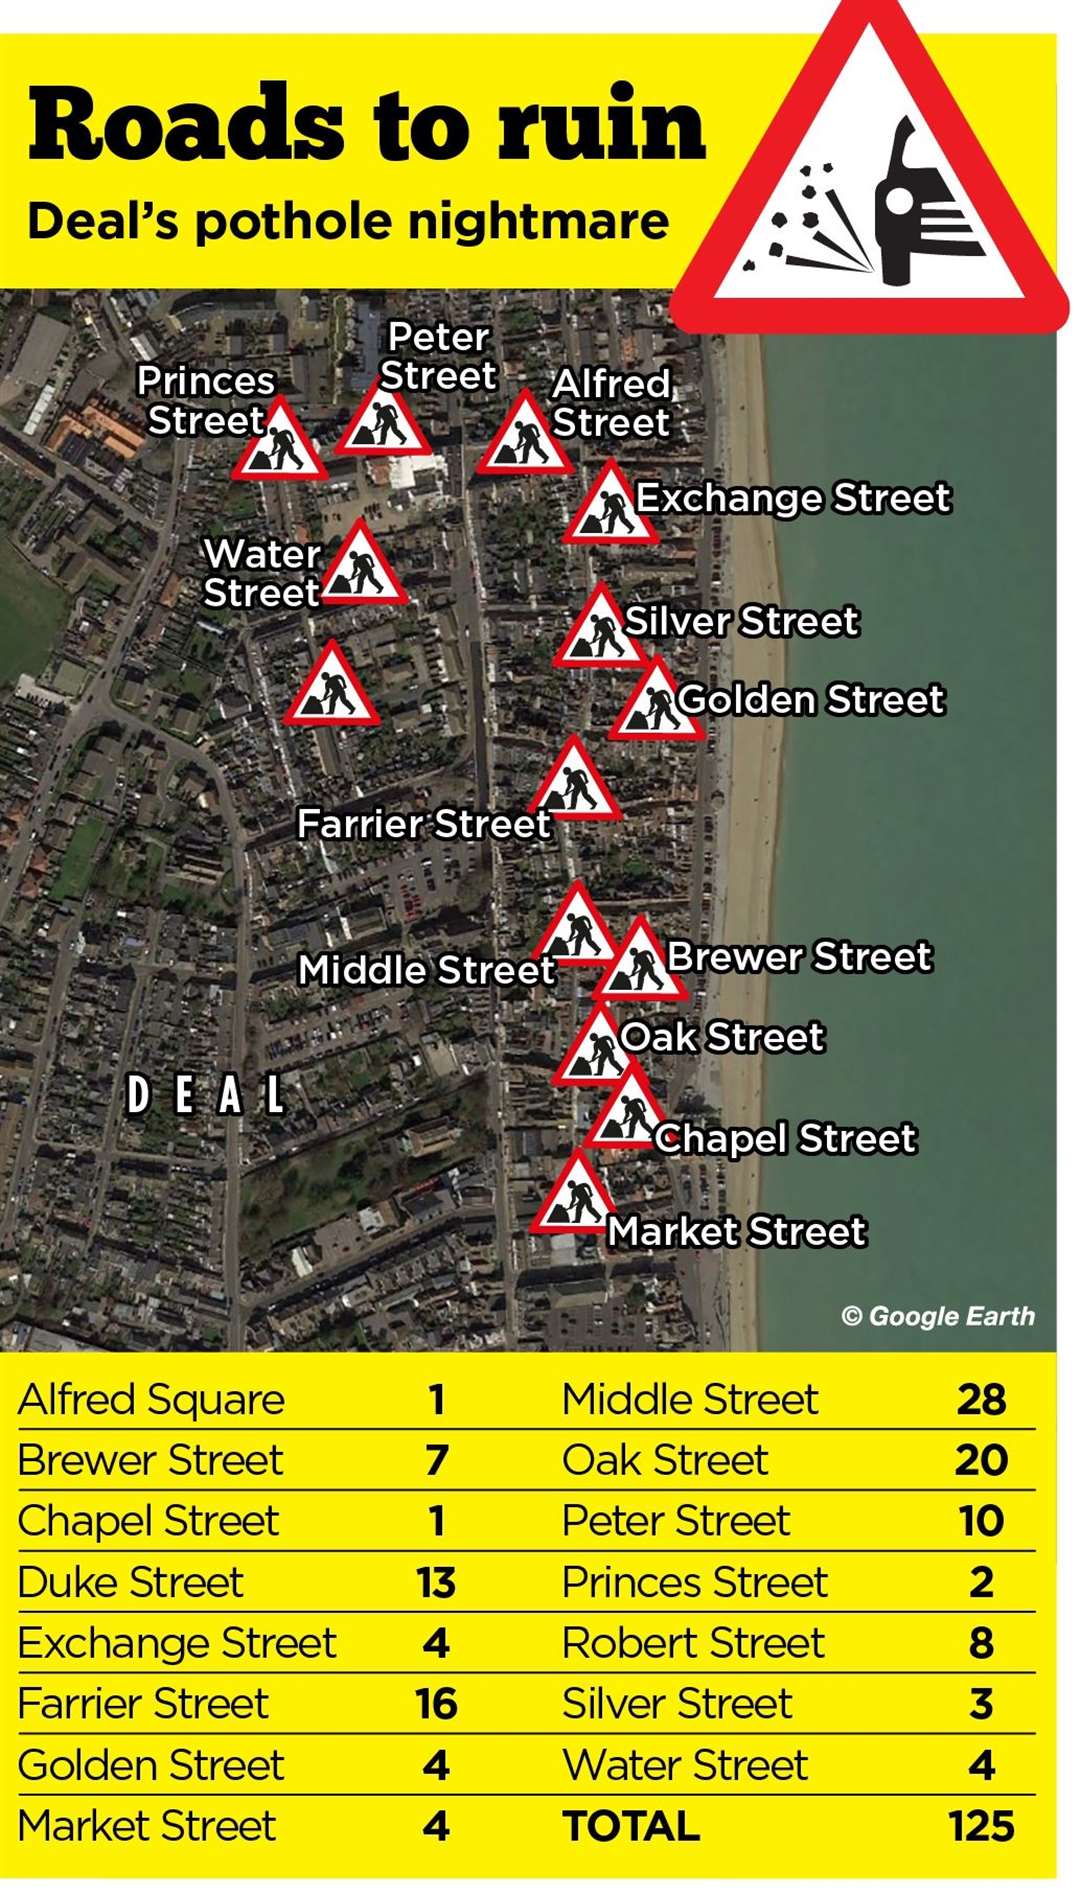 Sites of potholes in one small section of Deal